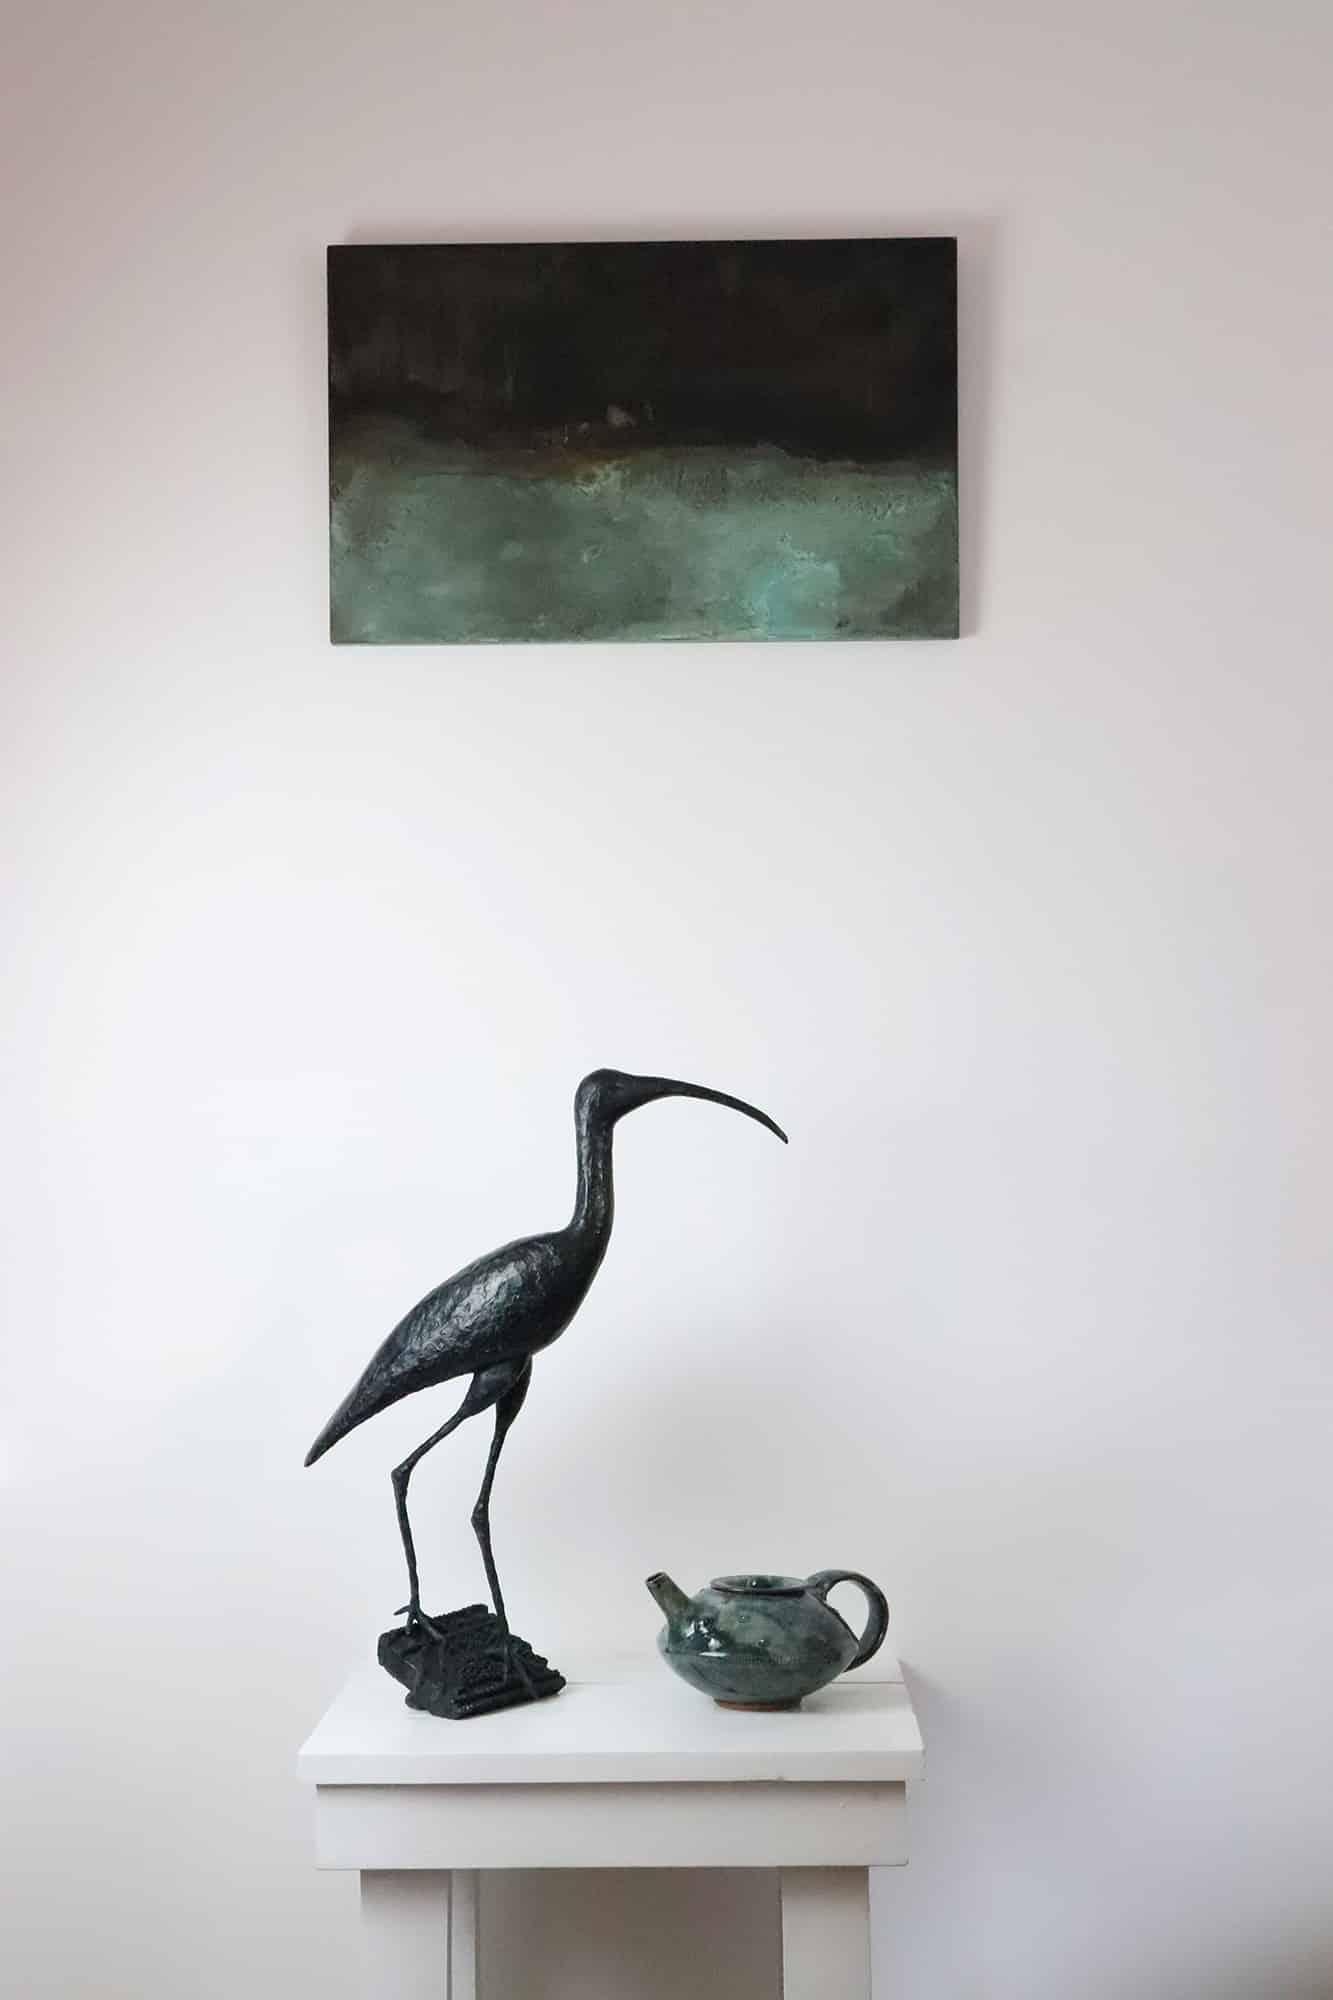 Sacred Ibis is a bronze sculpture by French contemporary artist Marine de Soos, dimensions are 56 × 44 × 20 cm (22 × 17.3 × 7.9 in). 
The sculpture is signed and numbered, it is part of a limited edition of 8 editions + 4 artist’s proofs, and comes